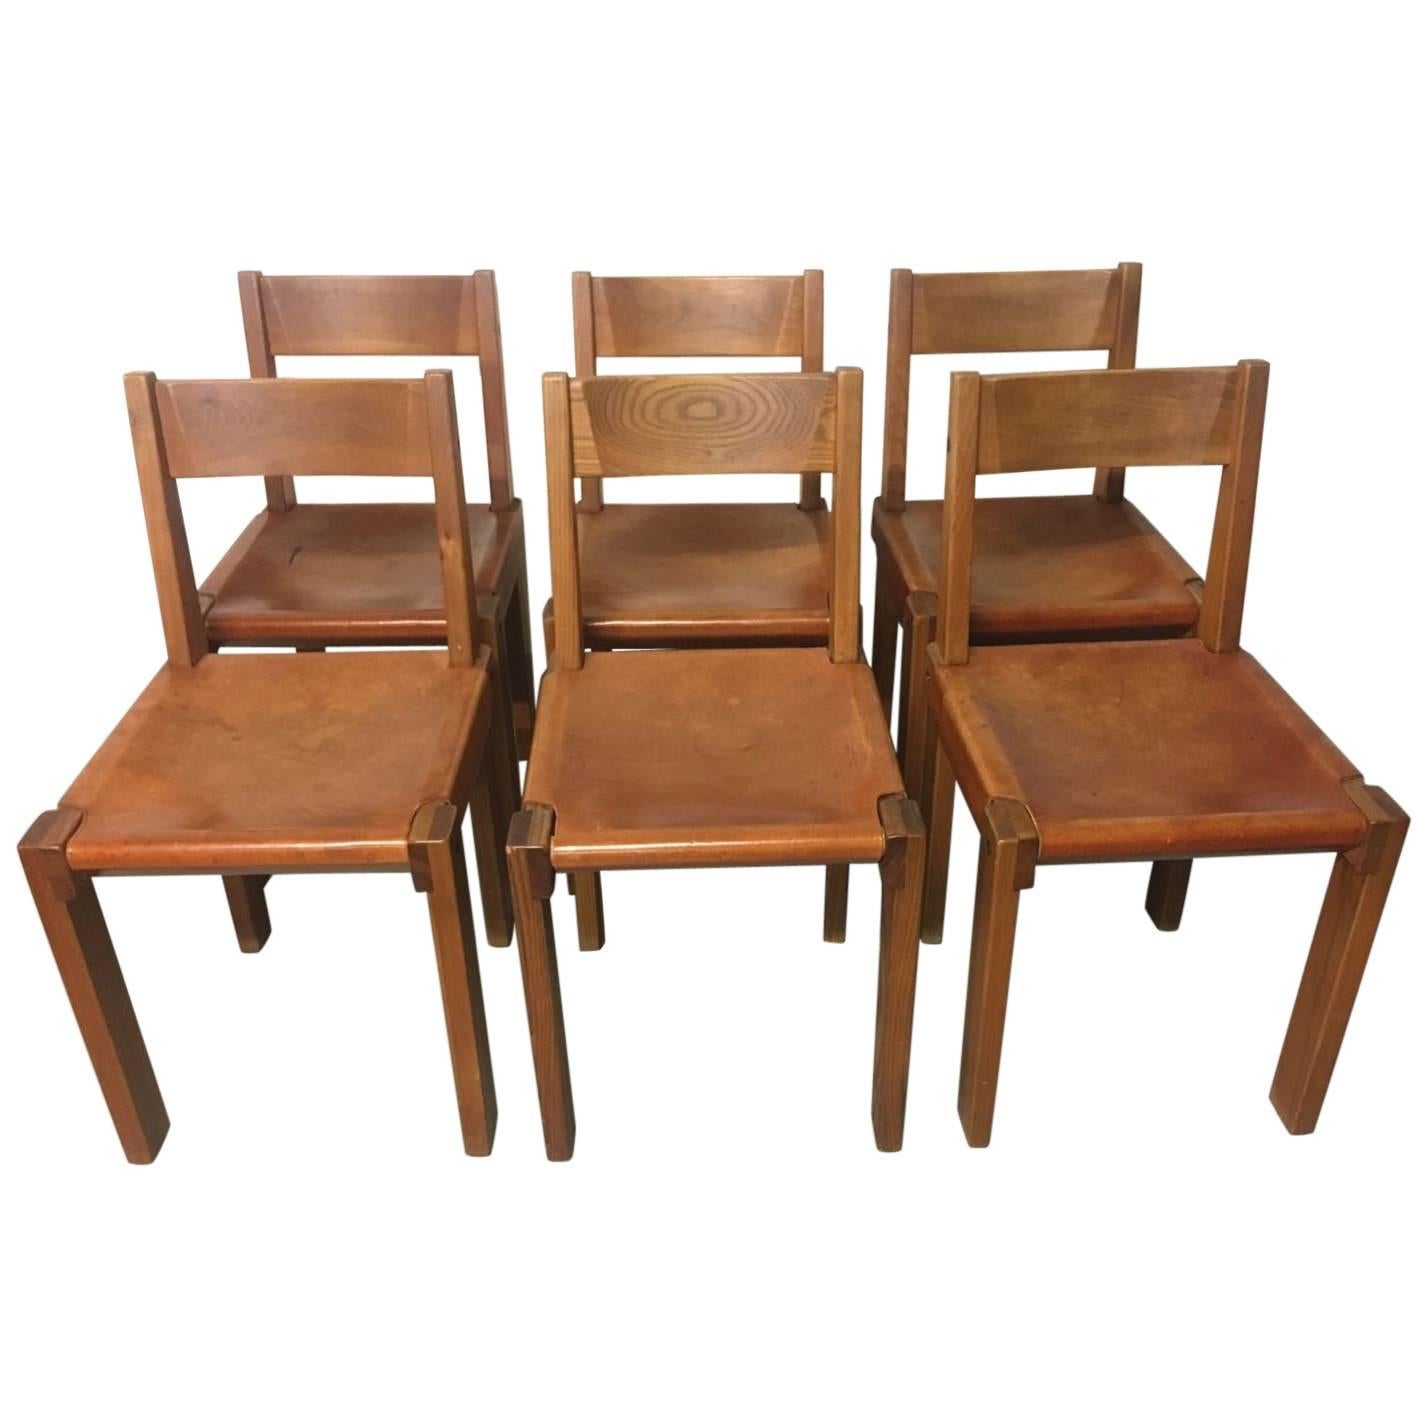 Set of Six "S24" Dining Chair by Pierre Chapo